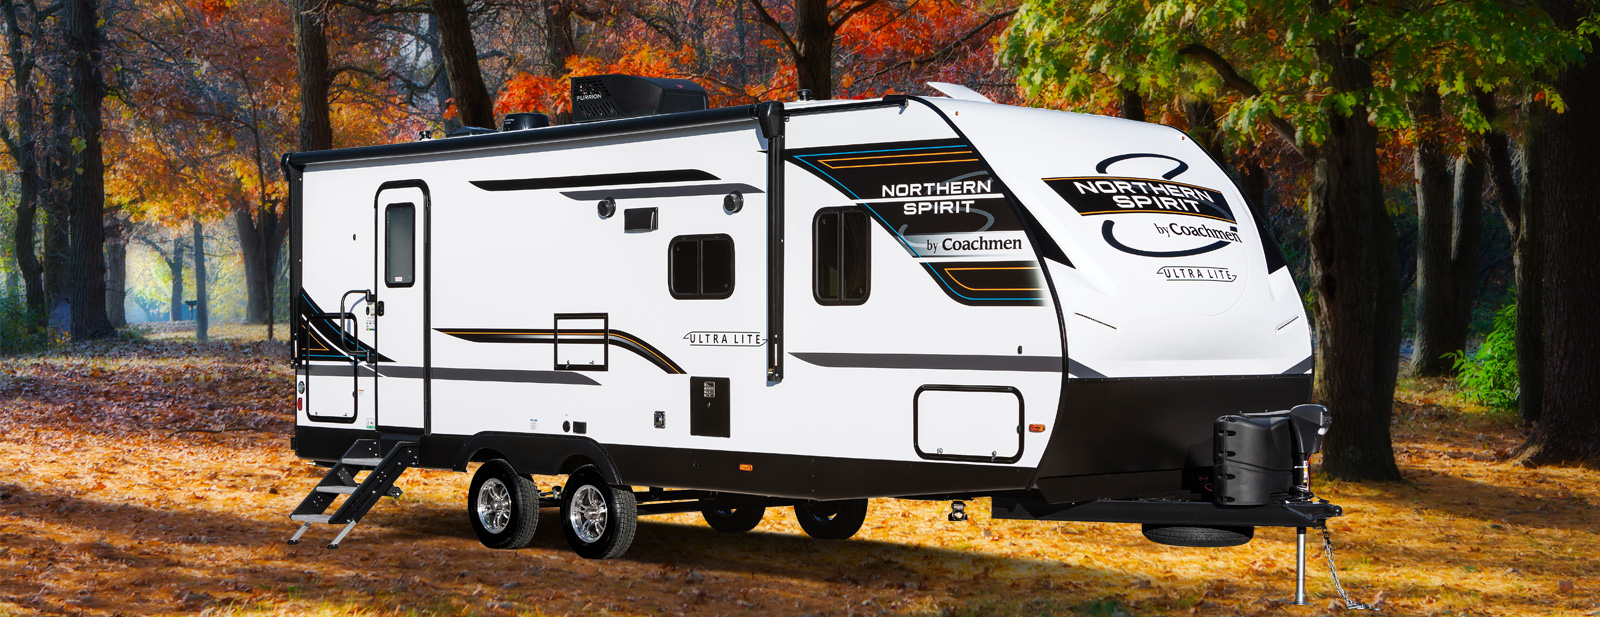 2023 Stealth Trailers for sale in Team One Trailers, Traverse City, Michigan